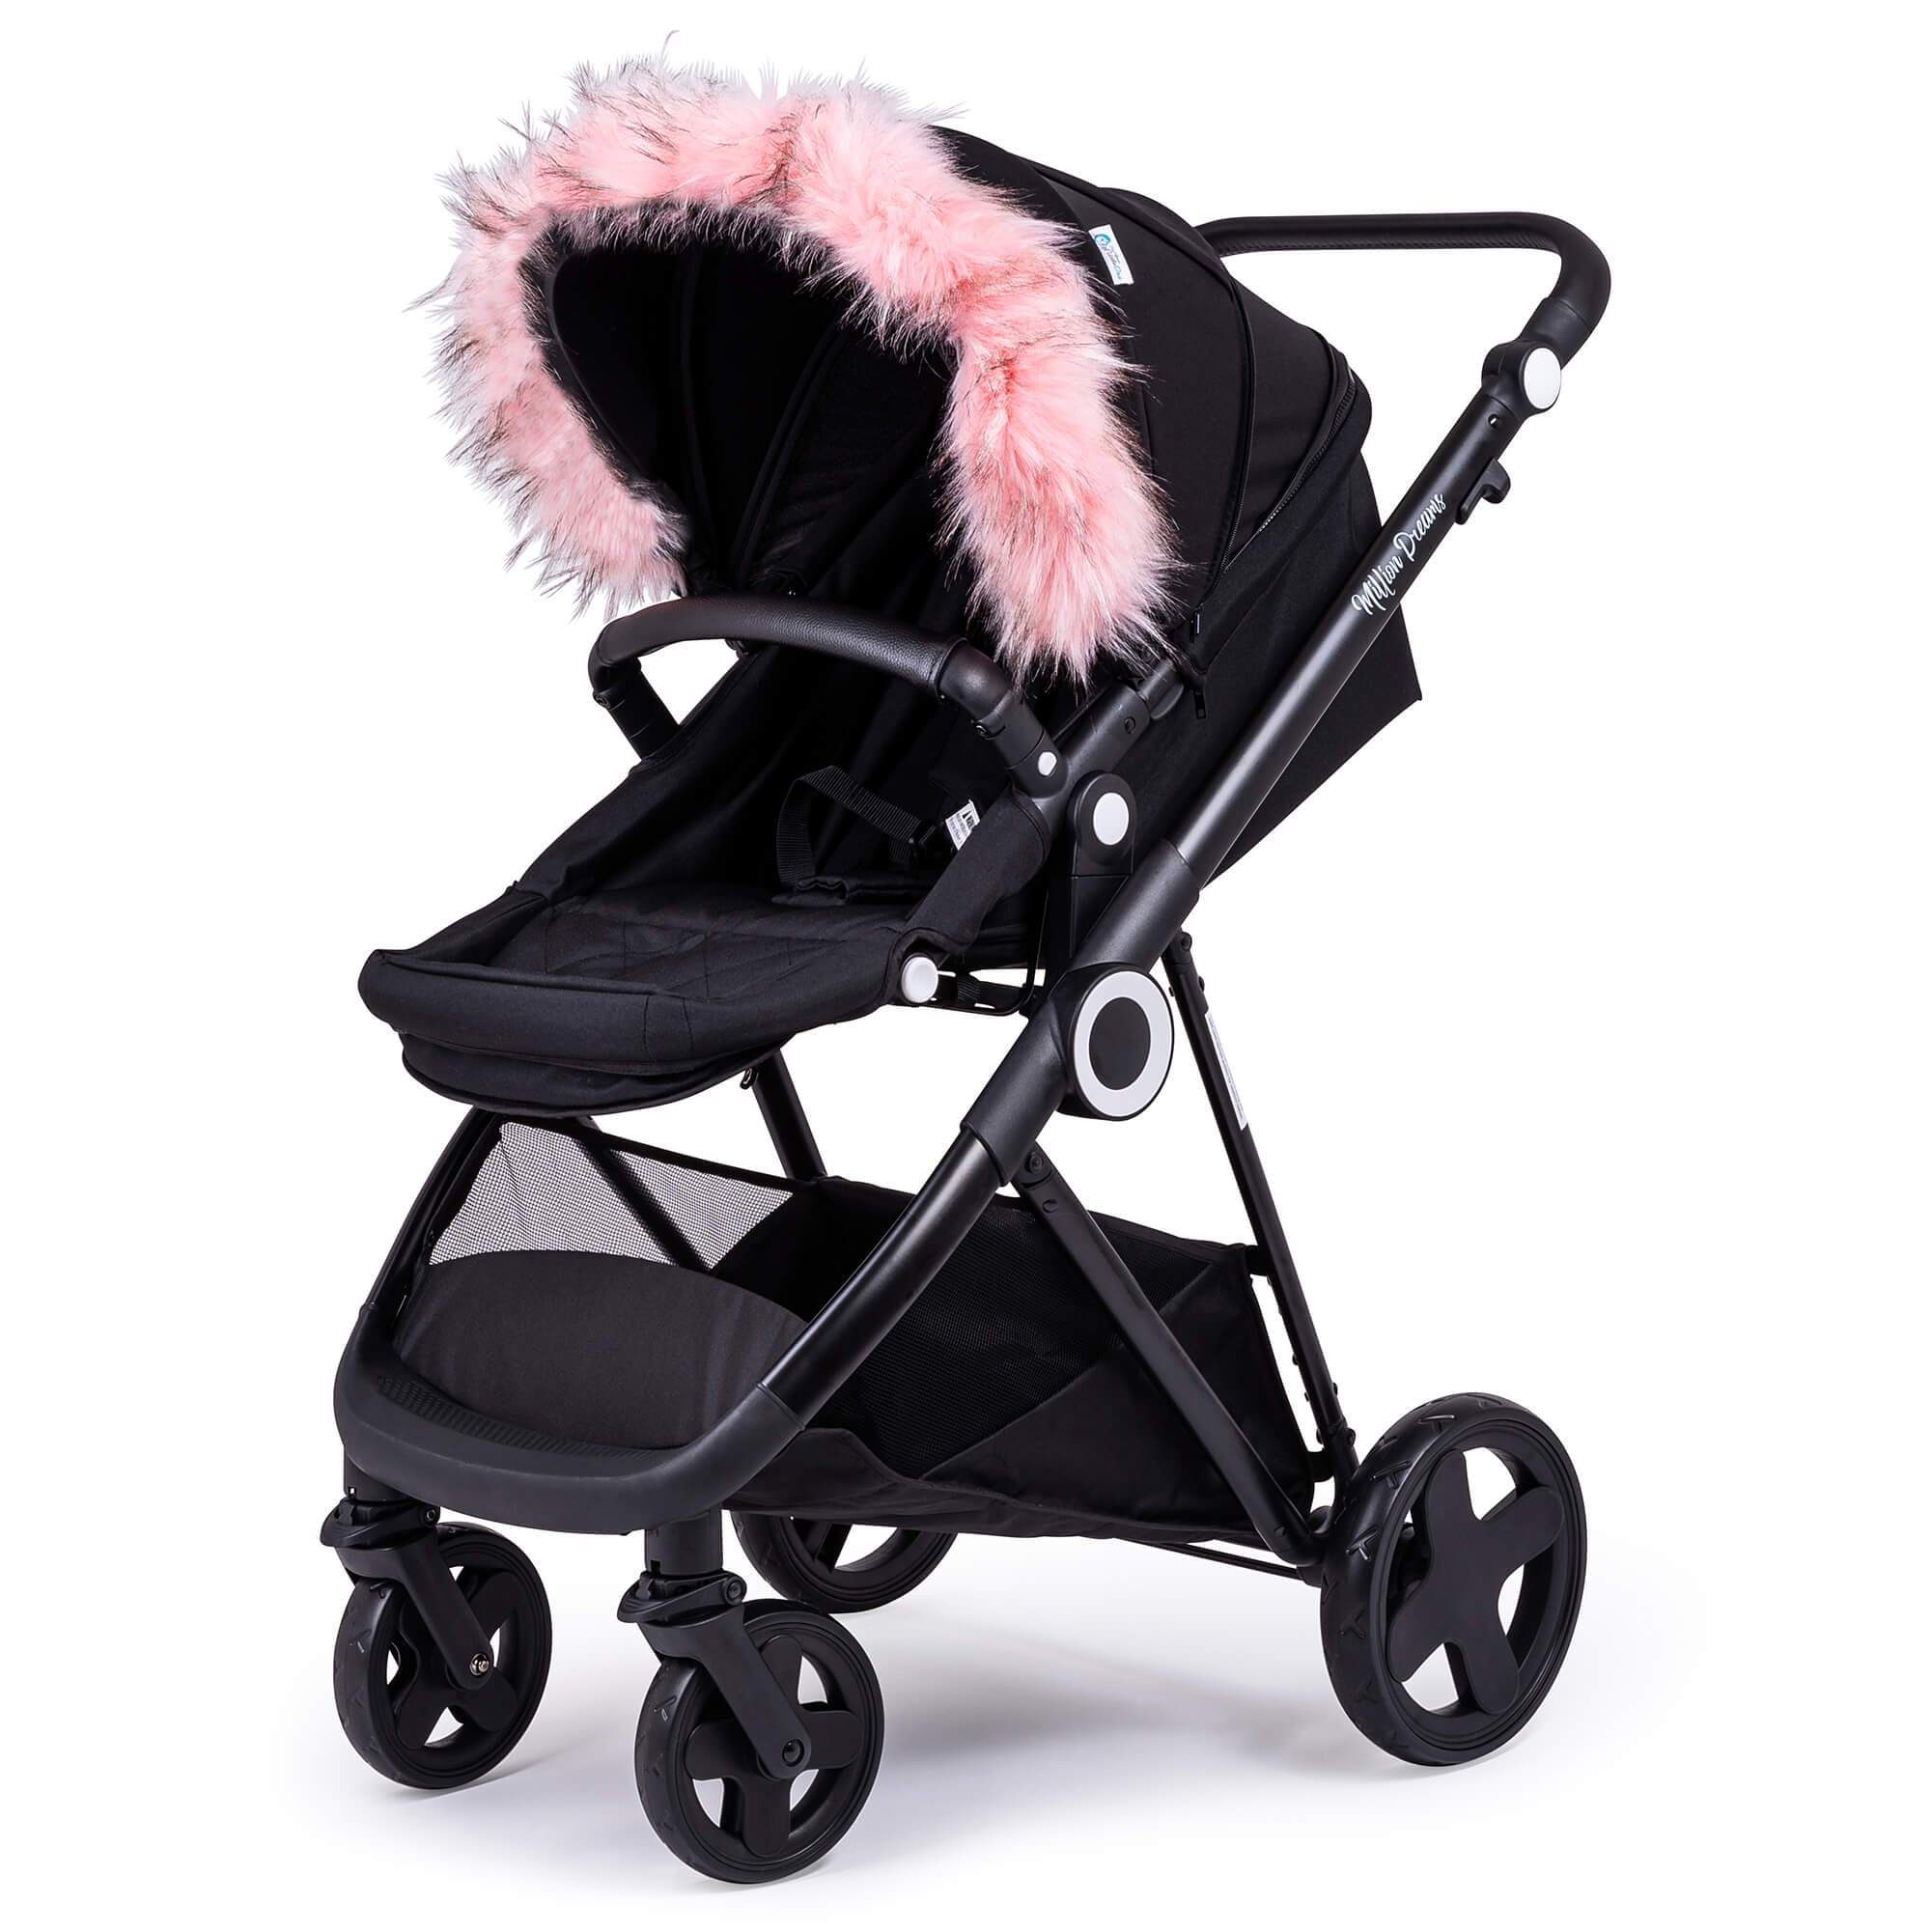 Pram Fur Hood Trim Attachment for Pushchair Compatible with Kiddicare - Light Pink / Fits All Models | For Your Little One